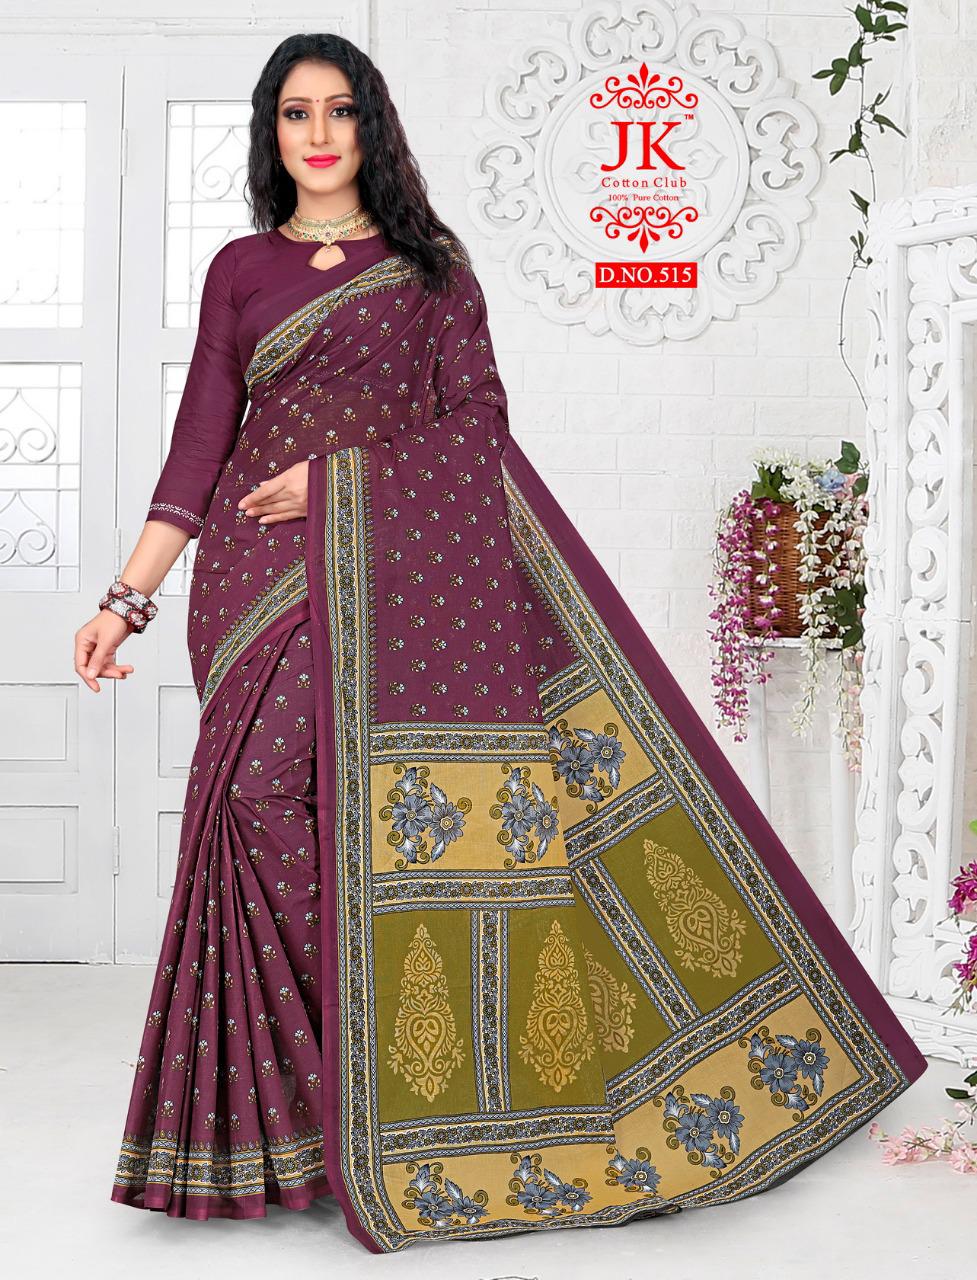 Pure cotton sarees wholesale supplier from Surat, india| Below 500